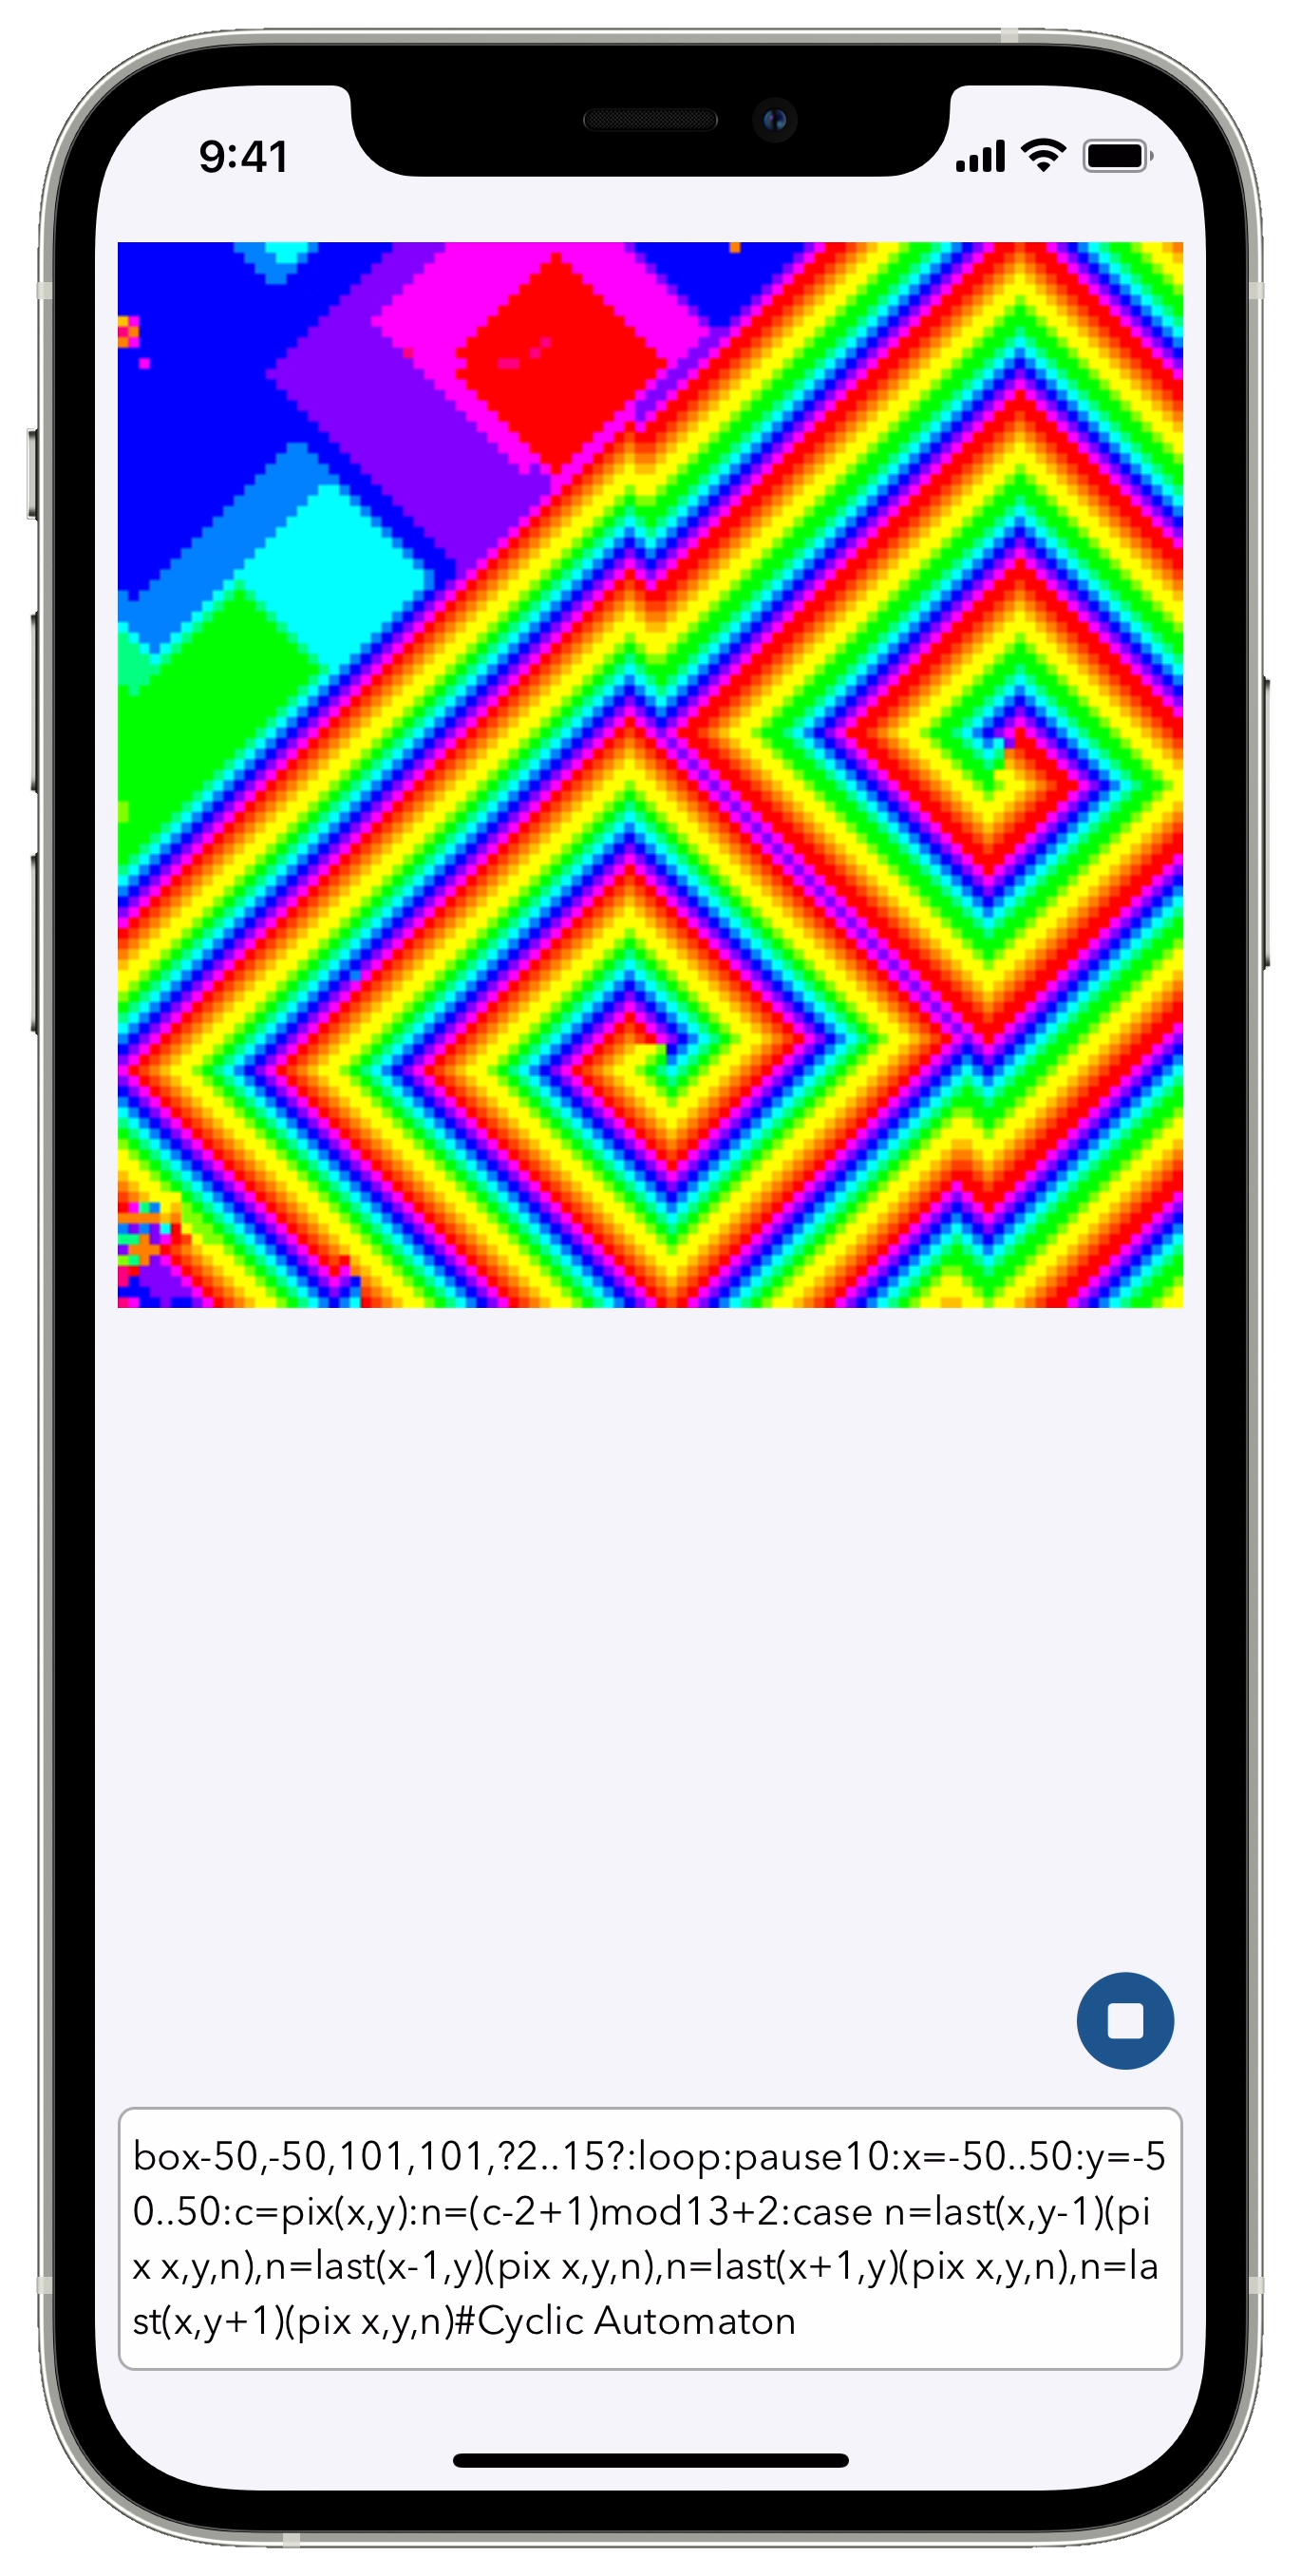 PixelNote, running a cyclic cellular automaton demo program; the pixel display is filled with colorful, diagonal spirals, and the text field at the bottom contains the code which produces this animation.